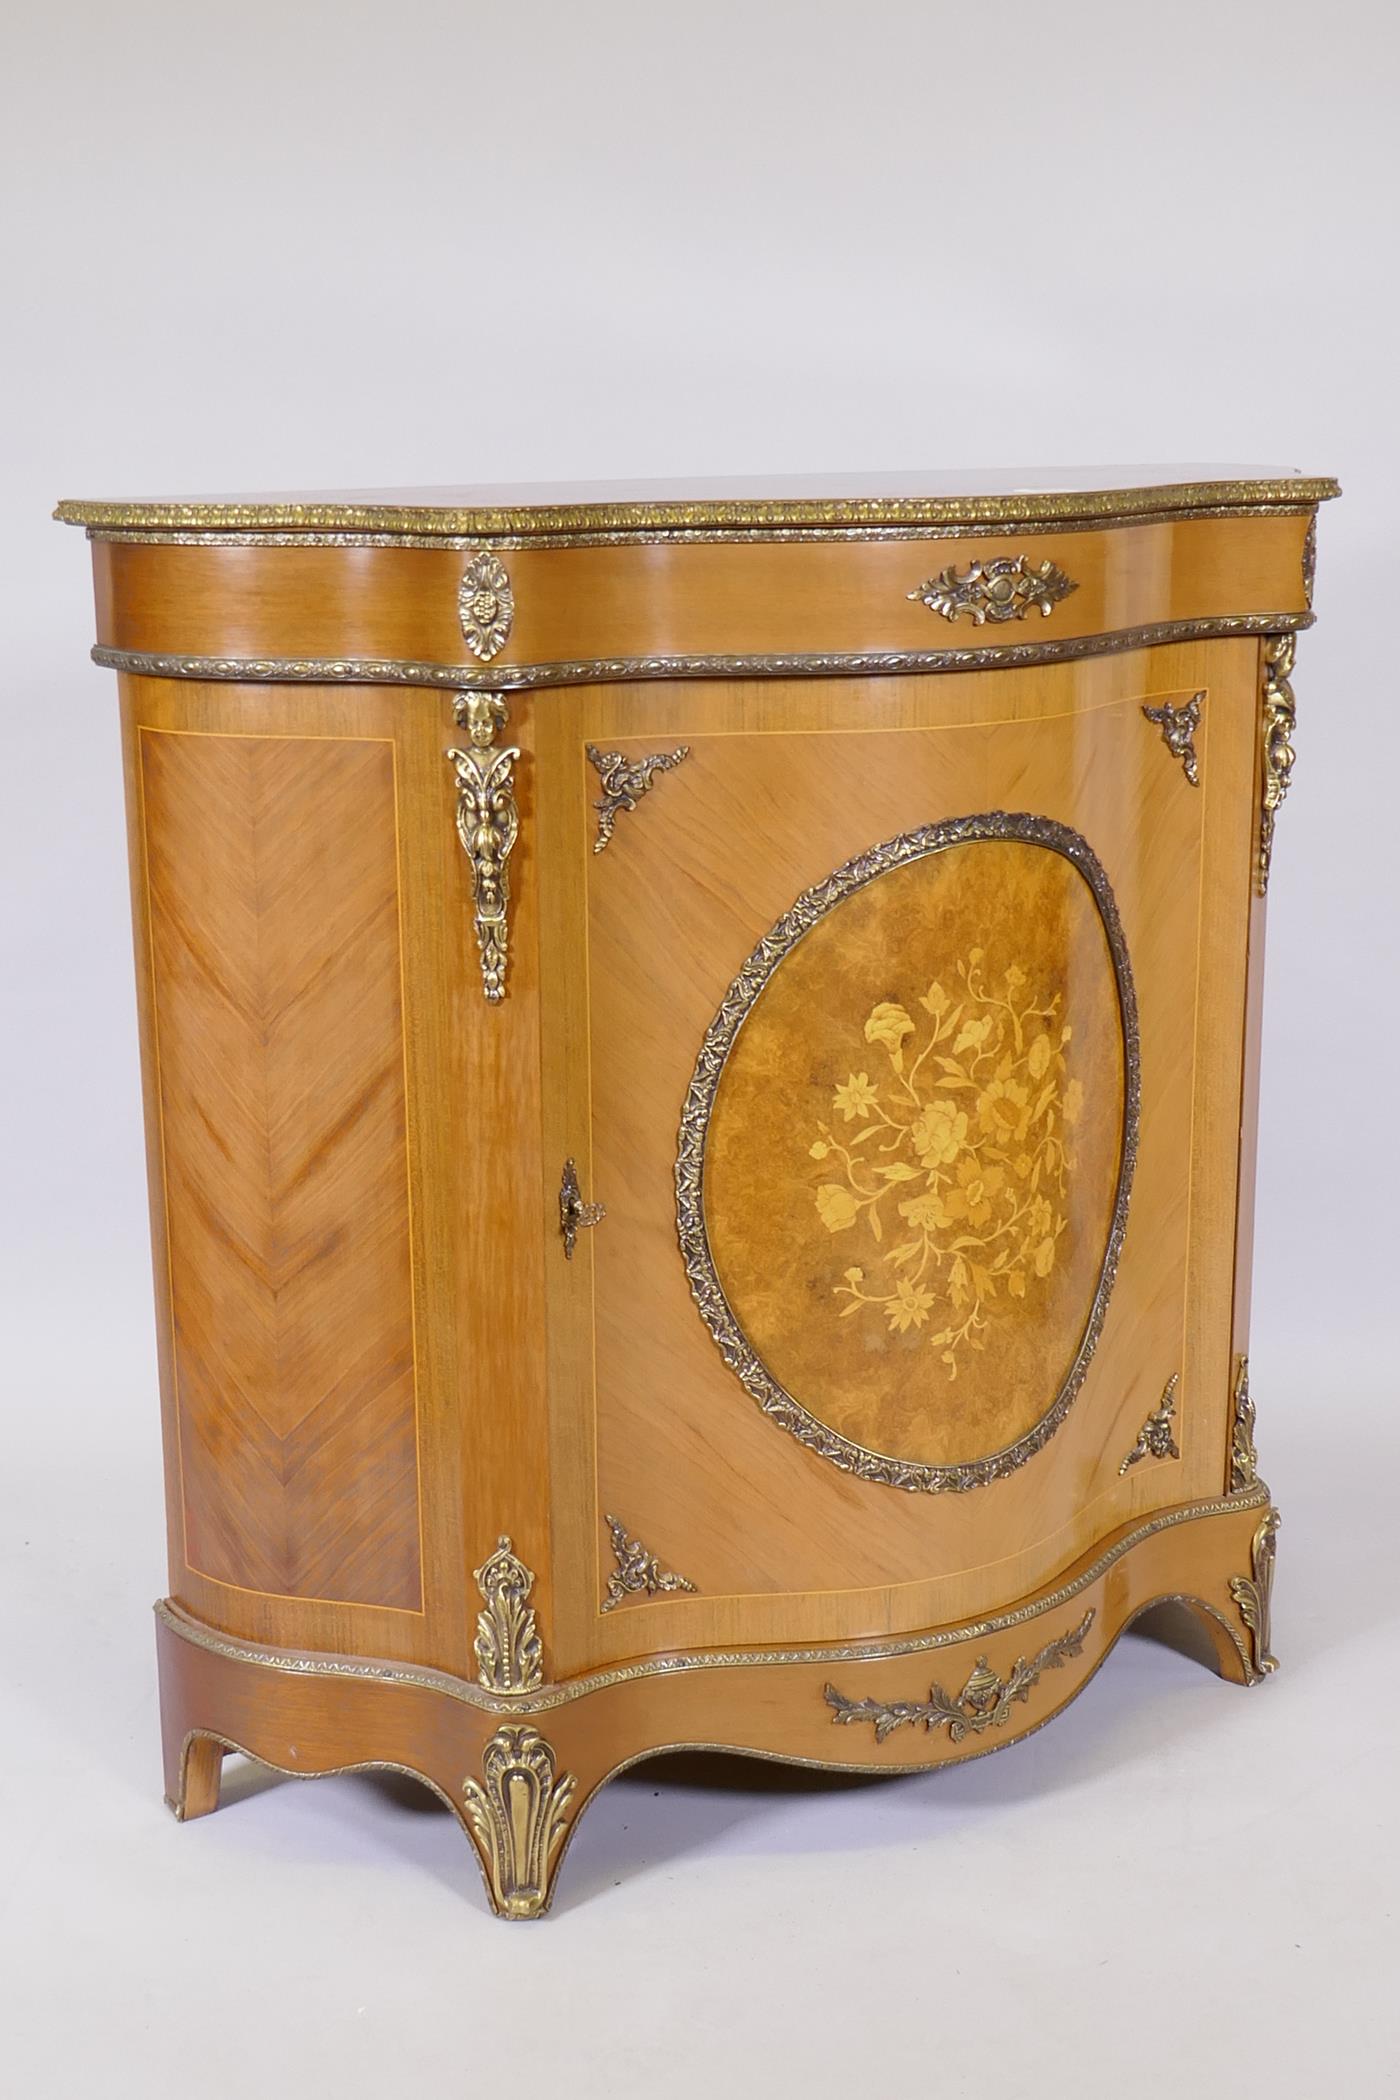 A French style tulipwood serpentine fronted cabinet with marquetry inlaid decoration and brass - Image 9 of 9